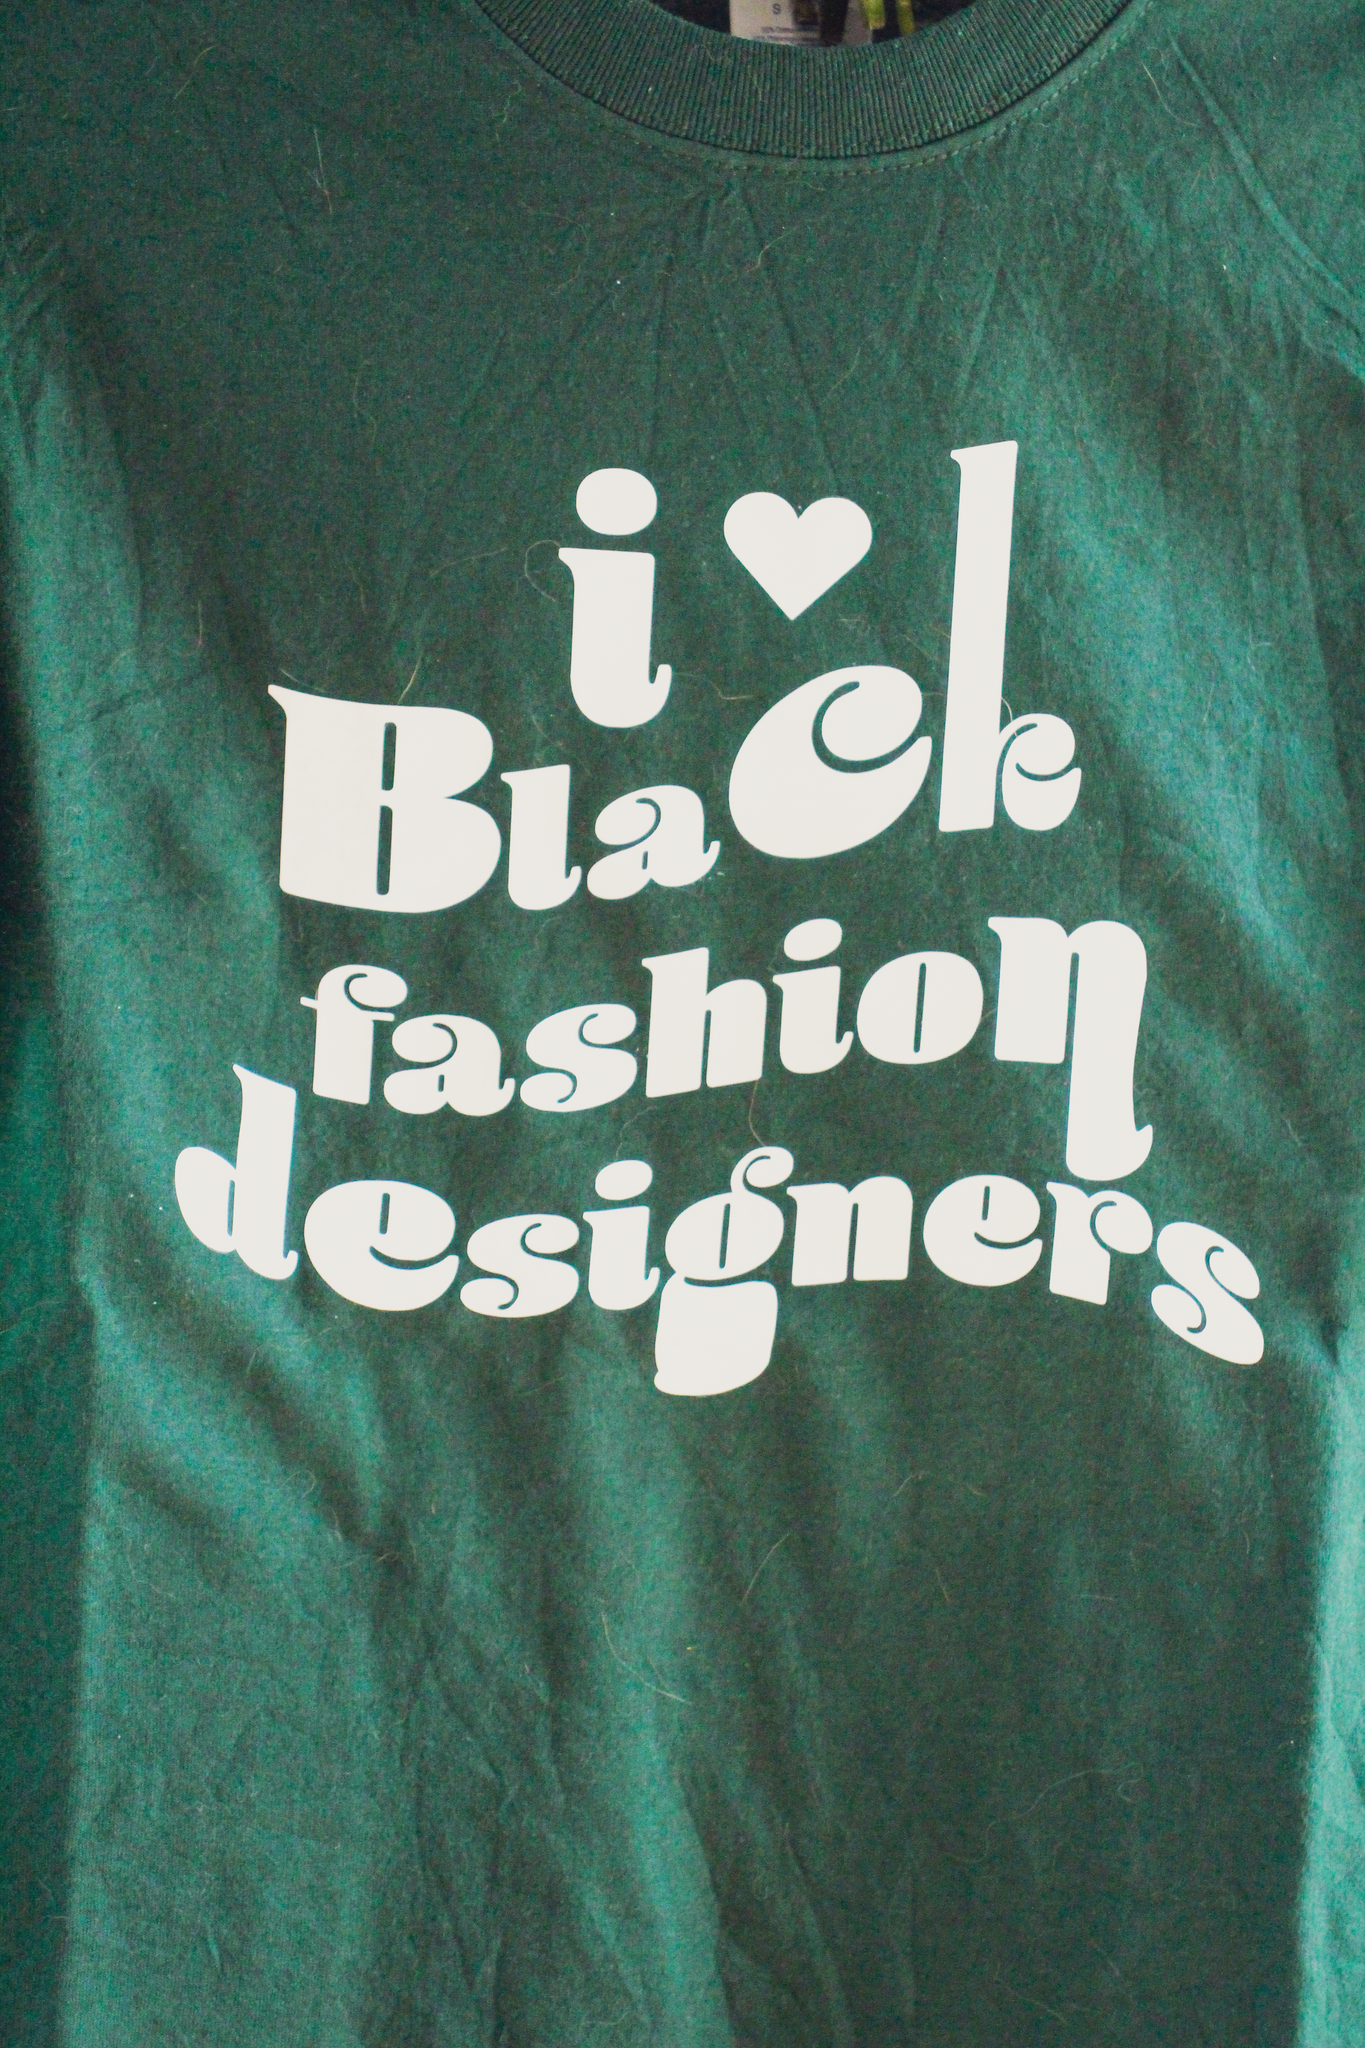 A dark green t-shirt with retro style text on it that reads "i love Black fashion designers"